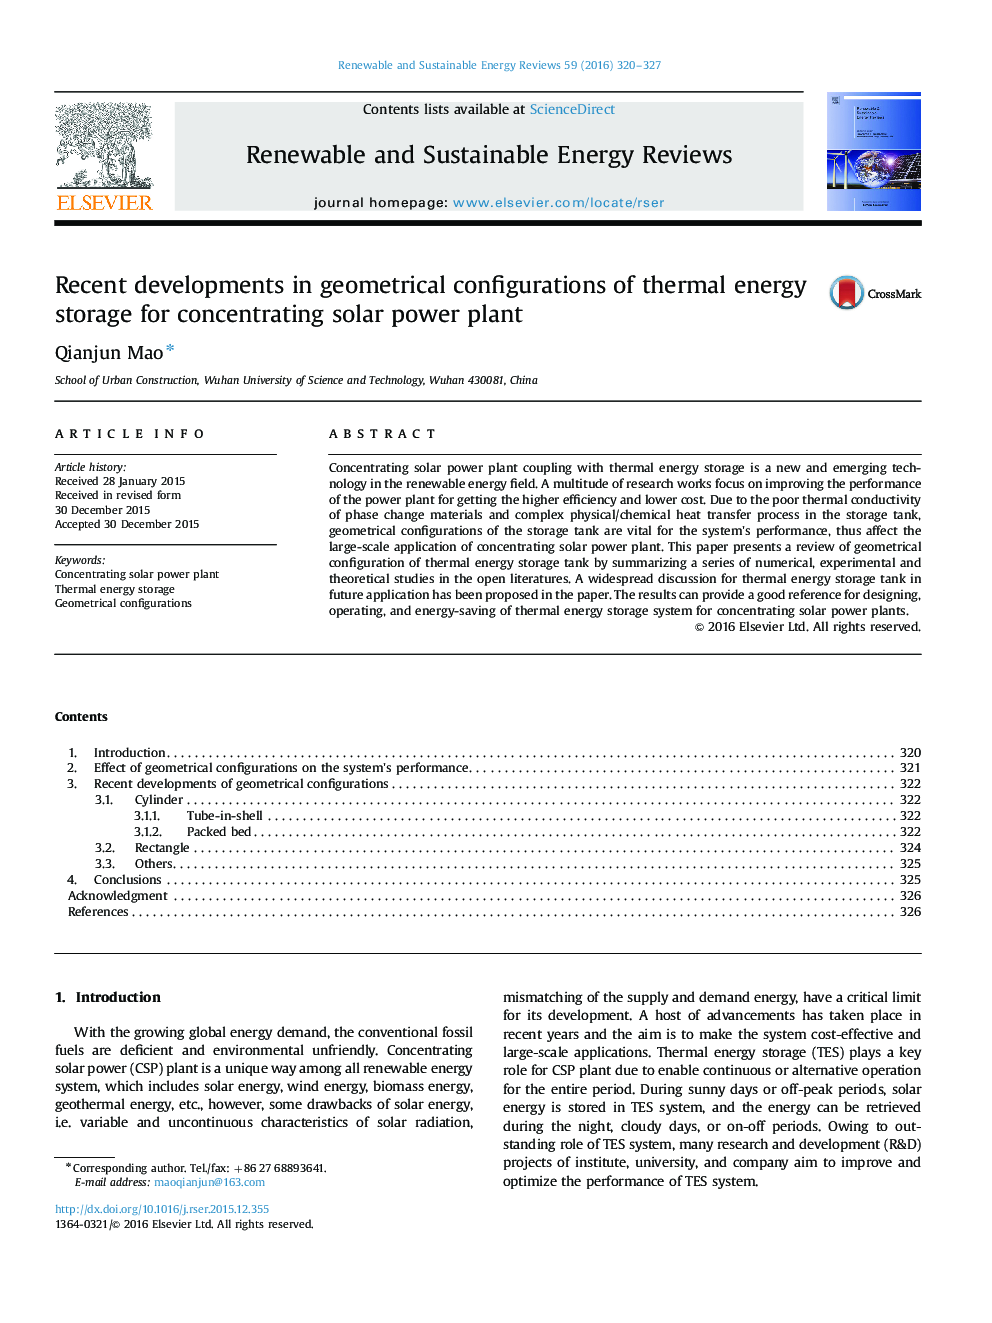 Recent developments in geometrical configurations of thermal energy storage for concentrating solar power plant